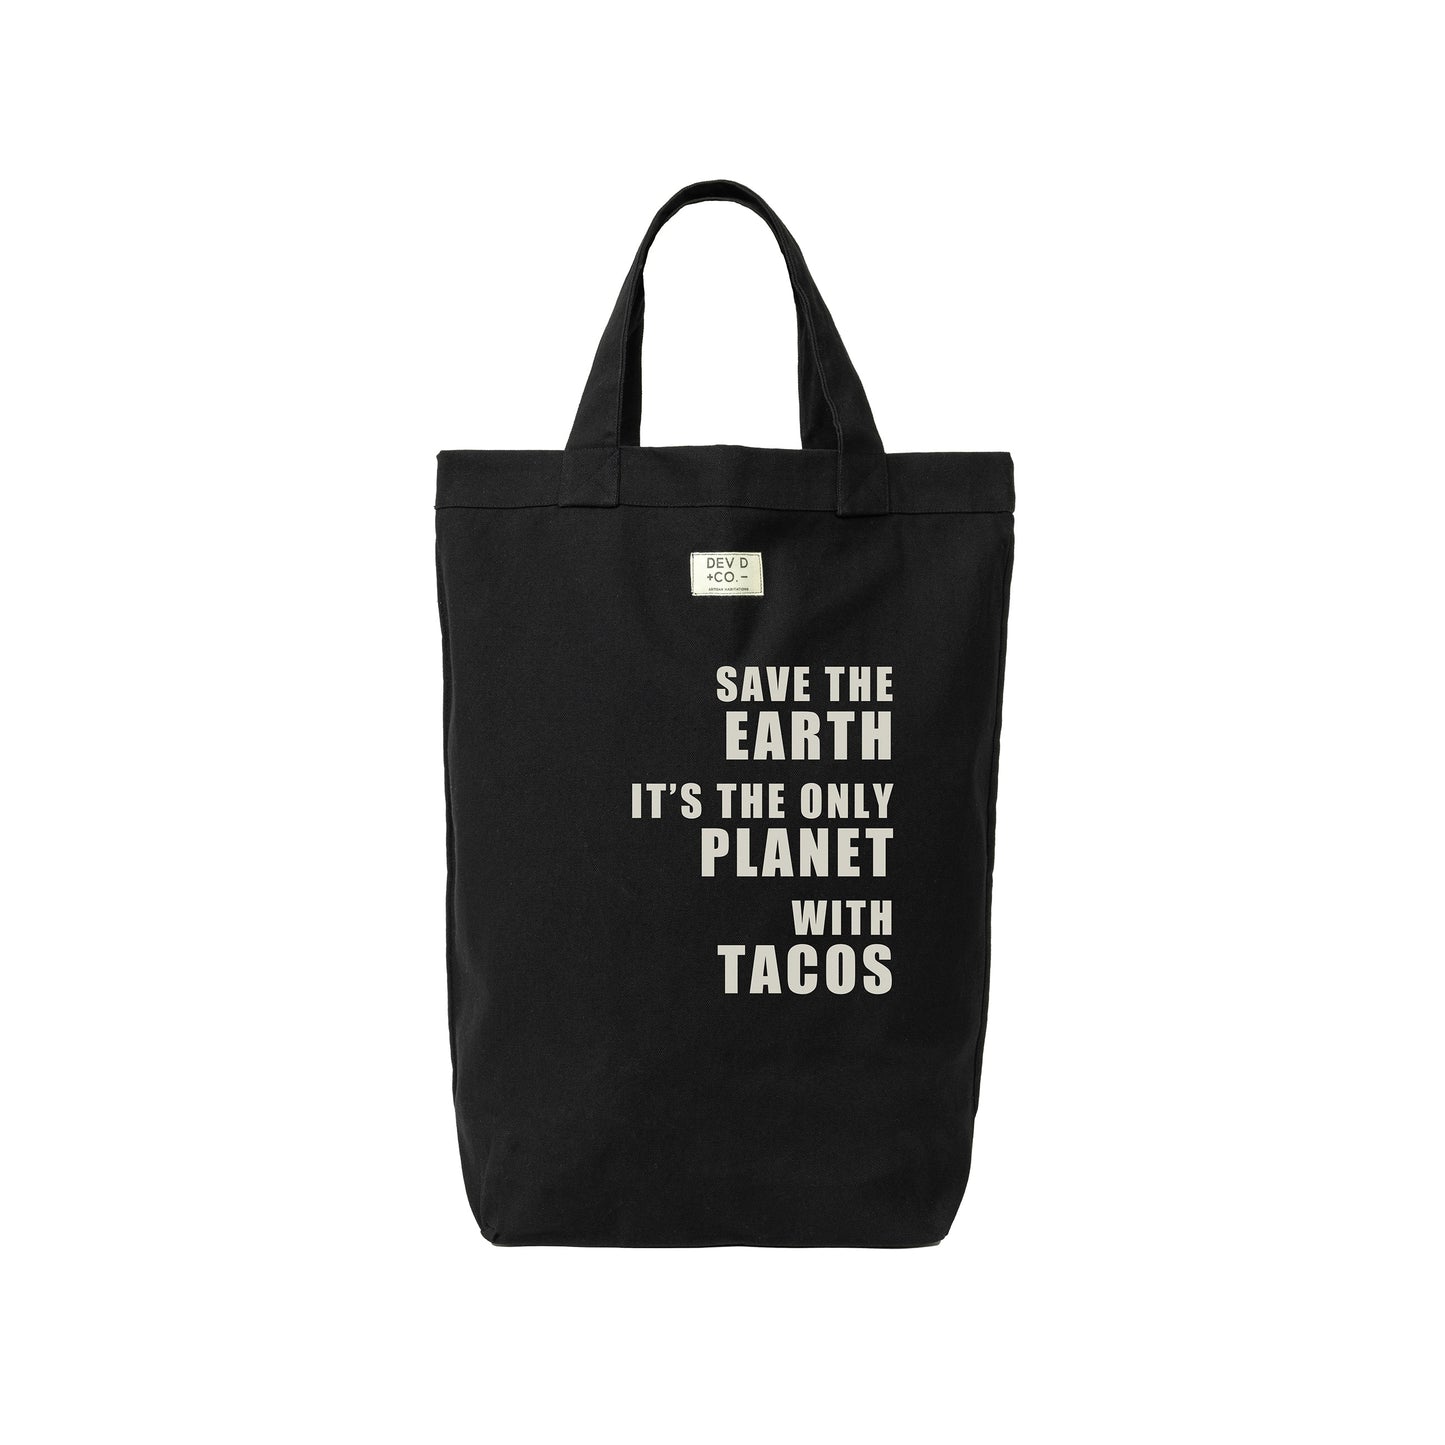 Save The Earth - Canvas Tote Bag - Market Tote